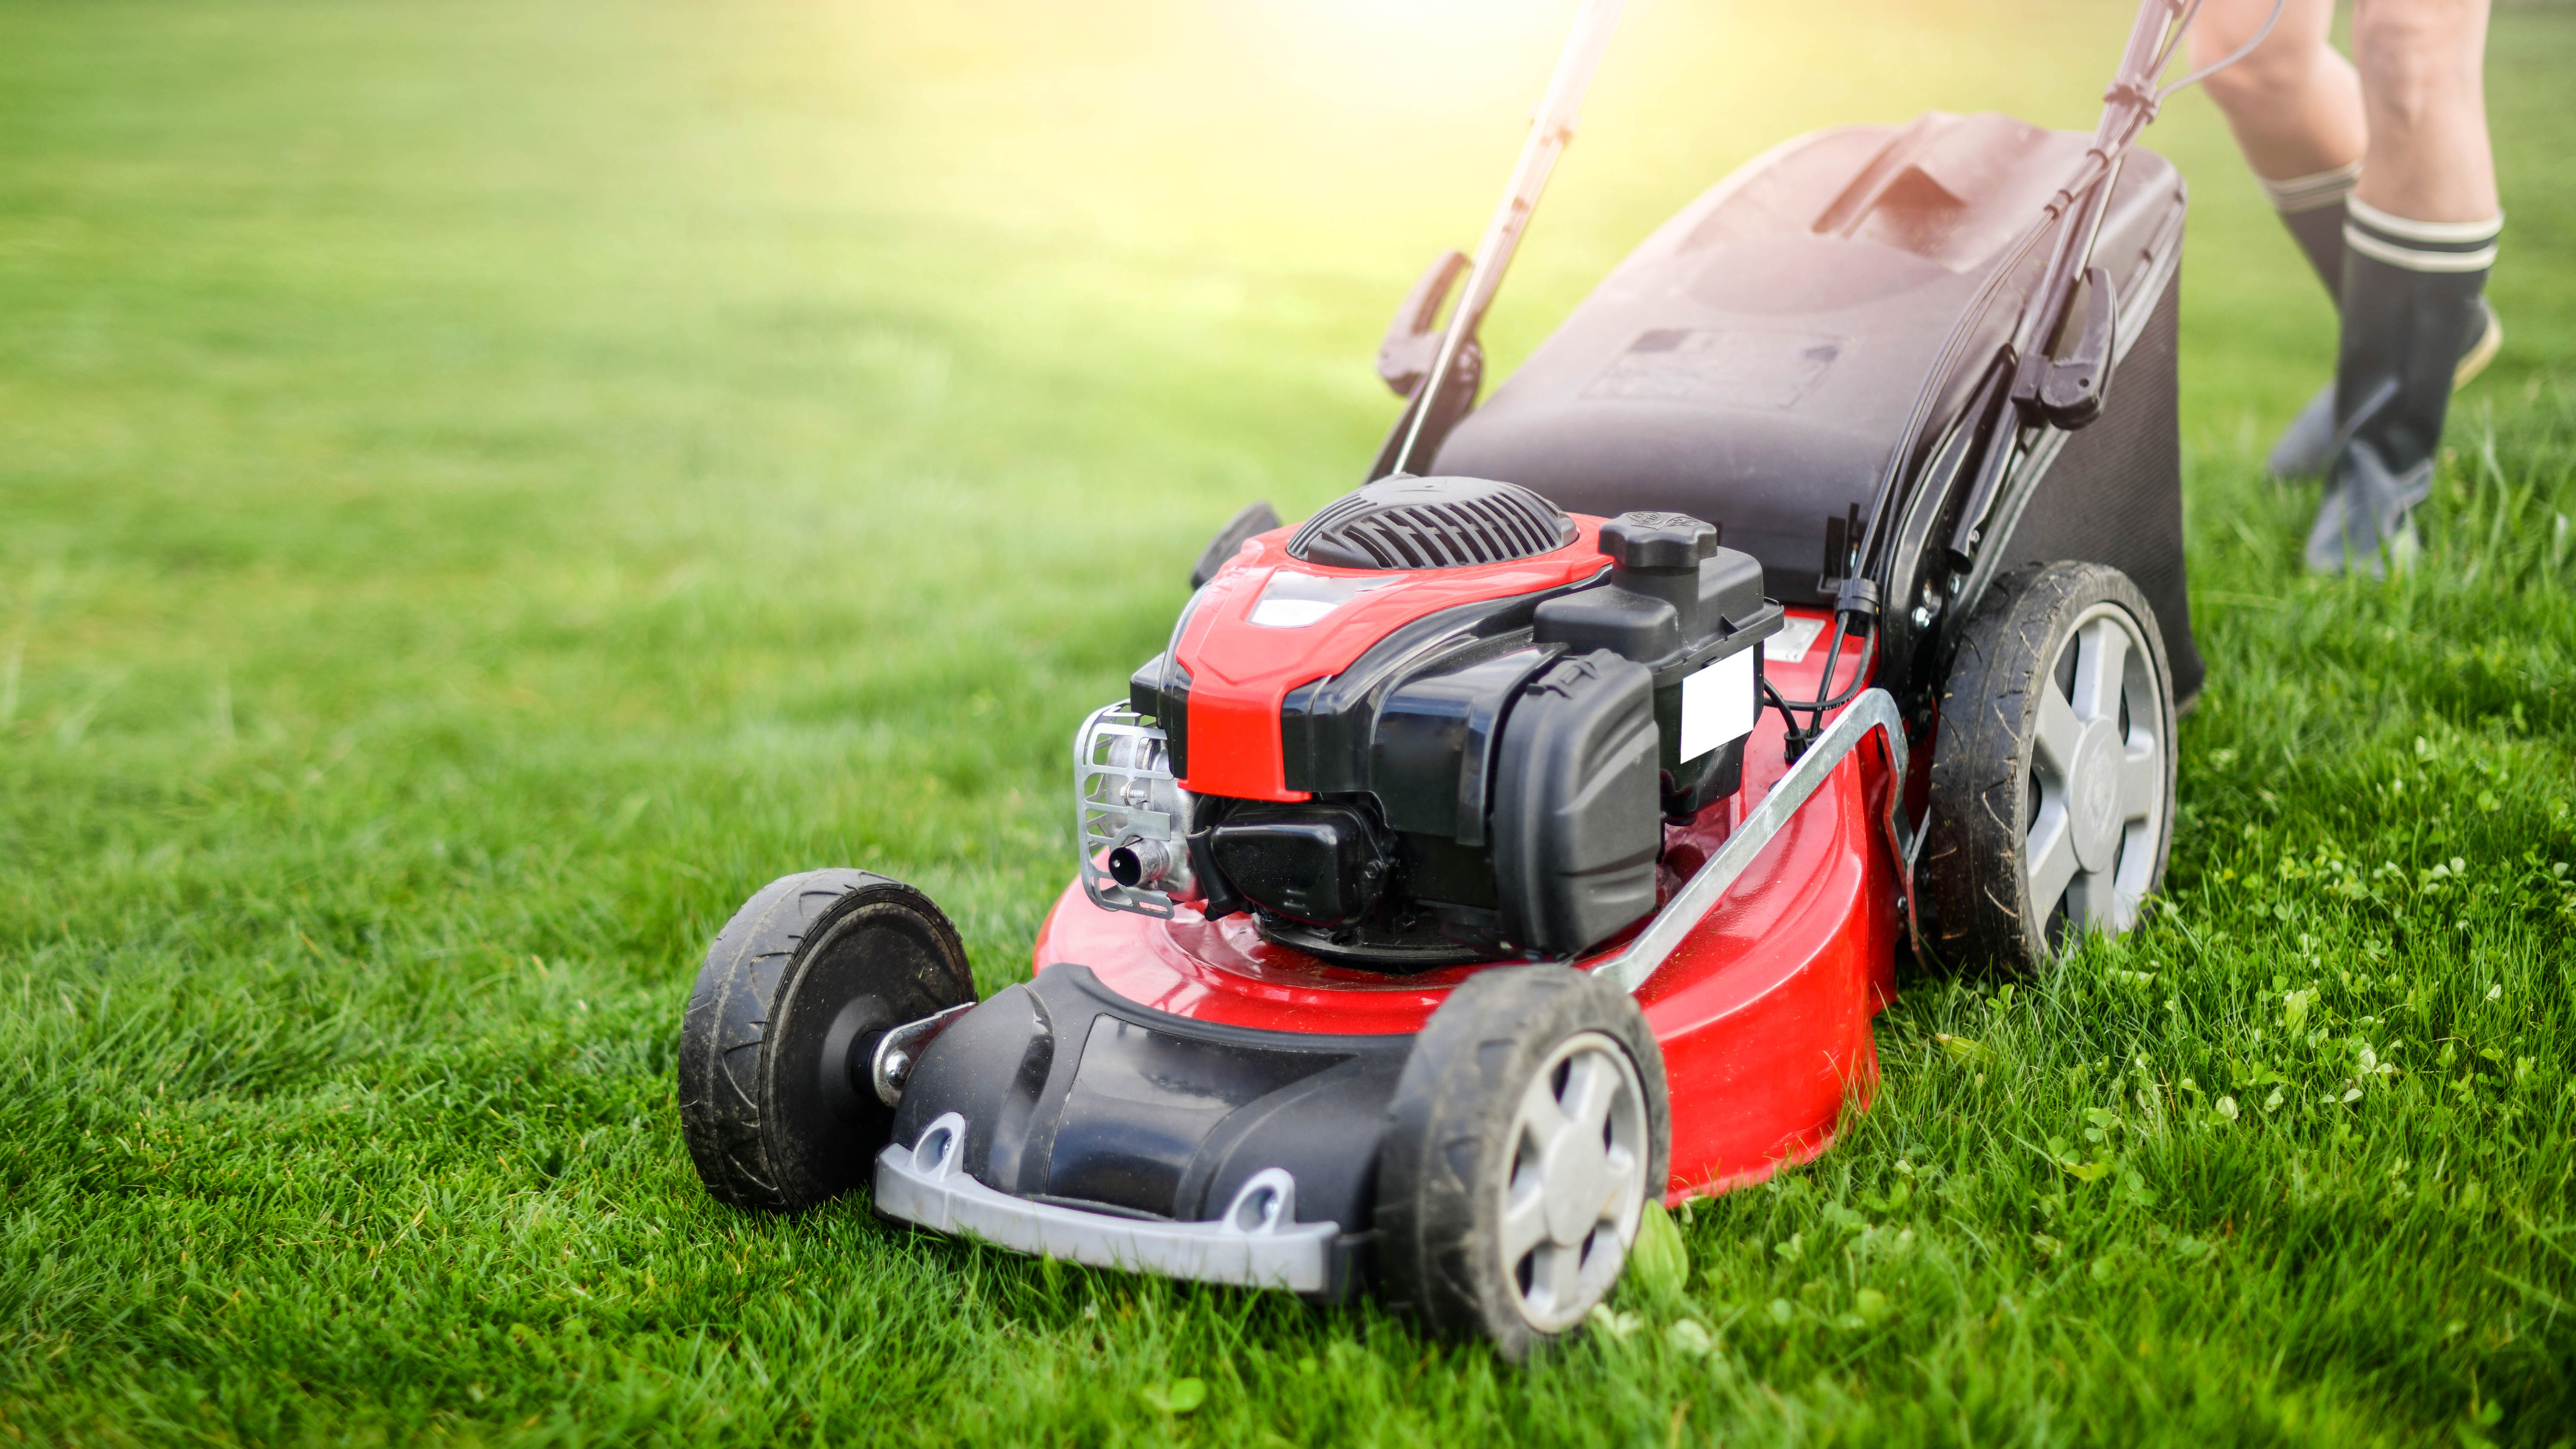 Mowing grass with a lawn mower